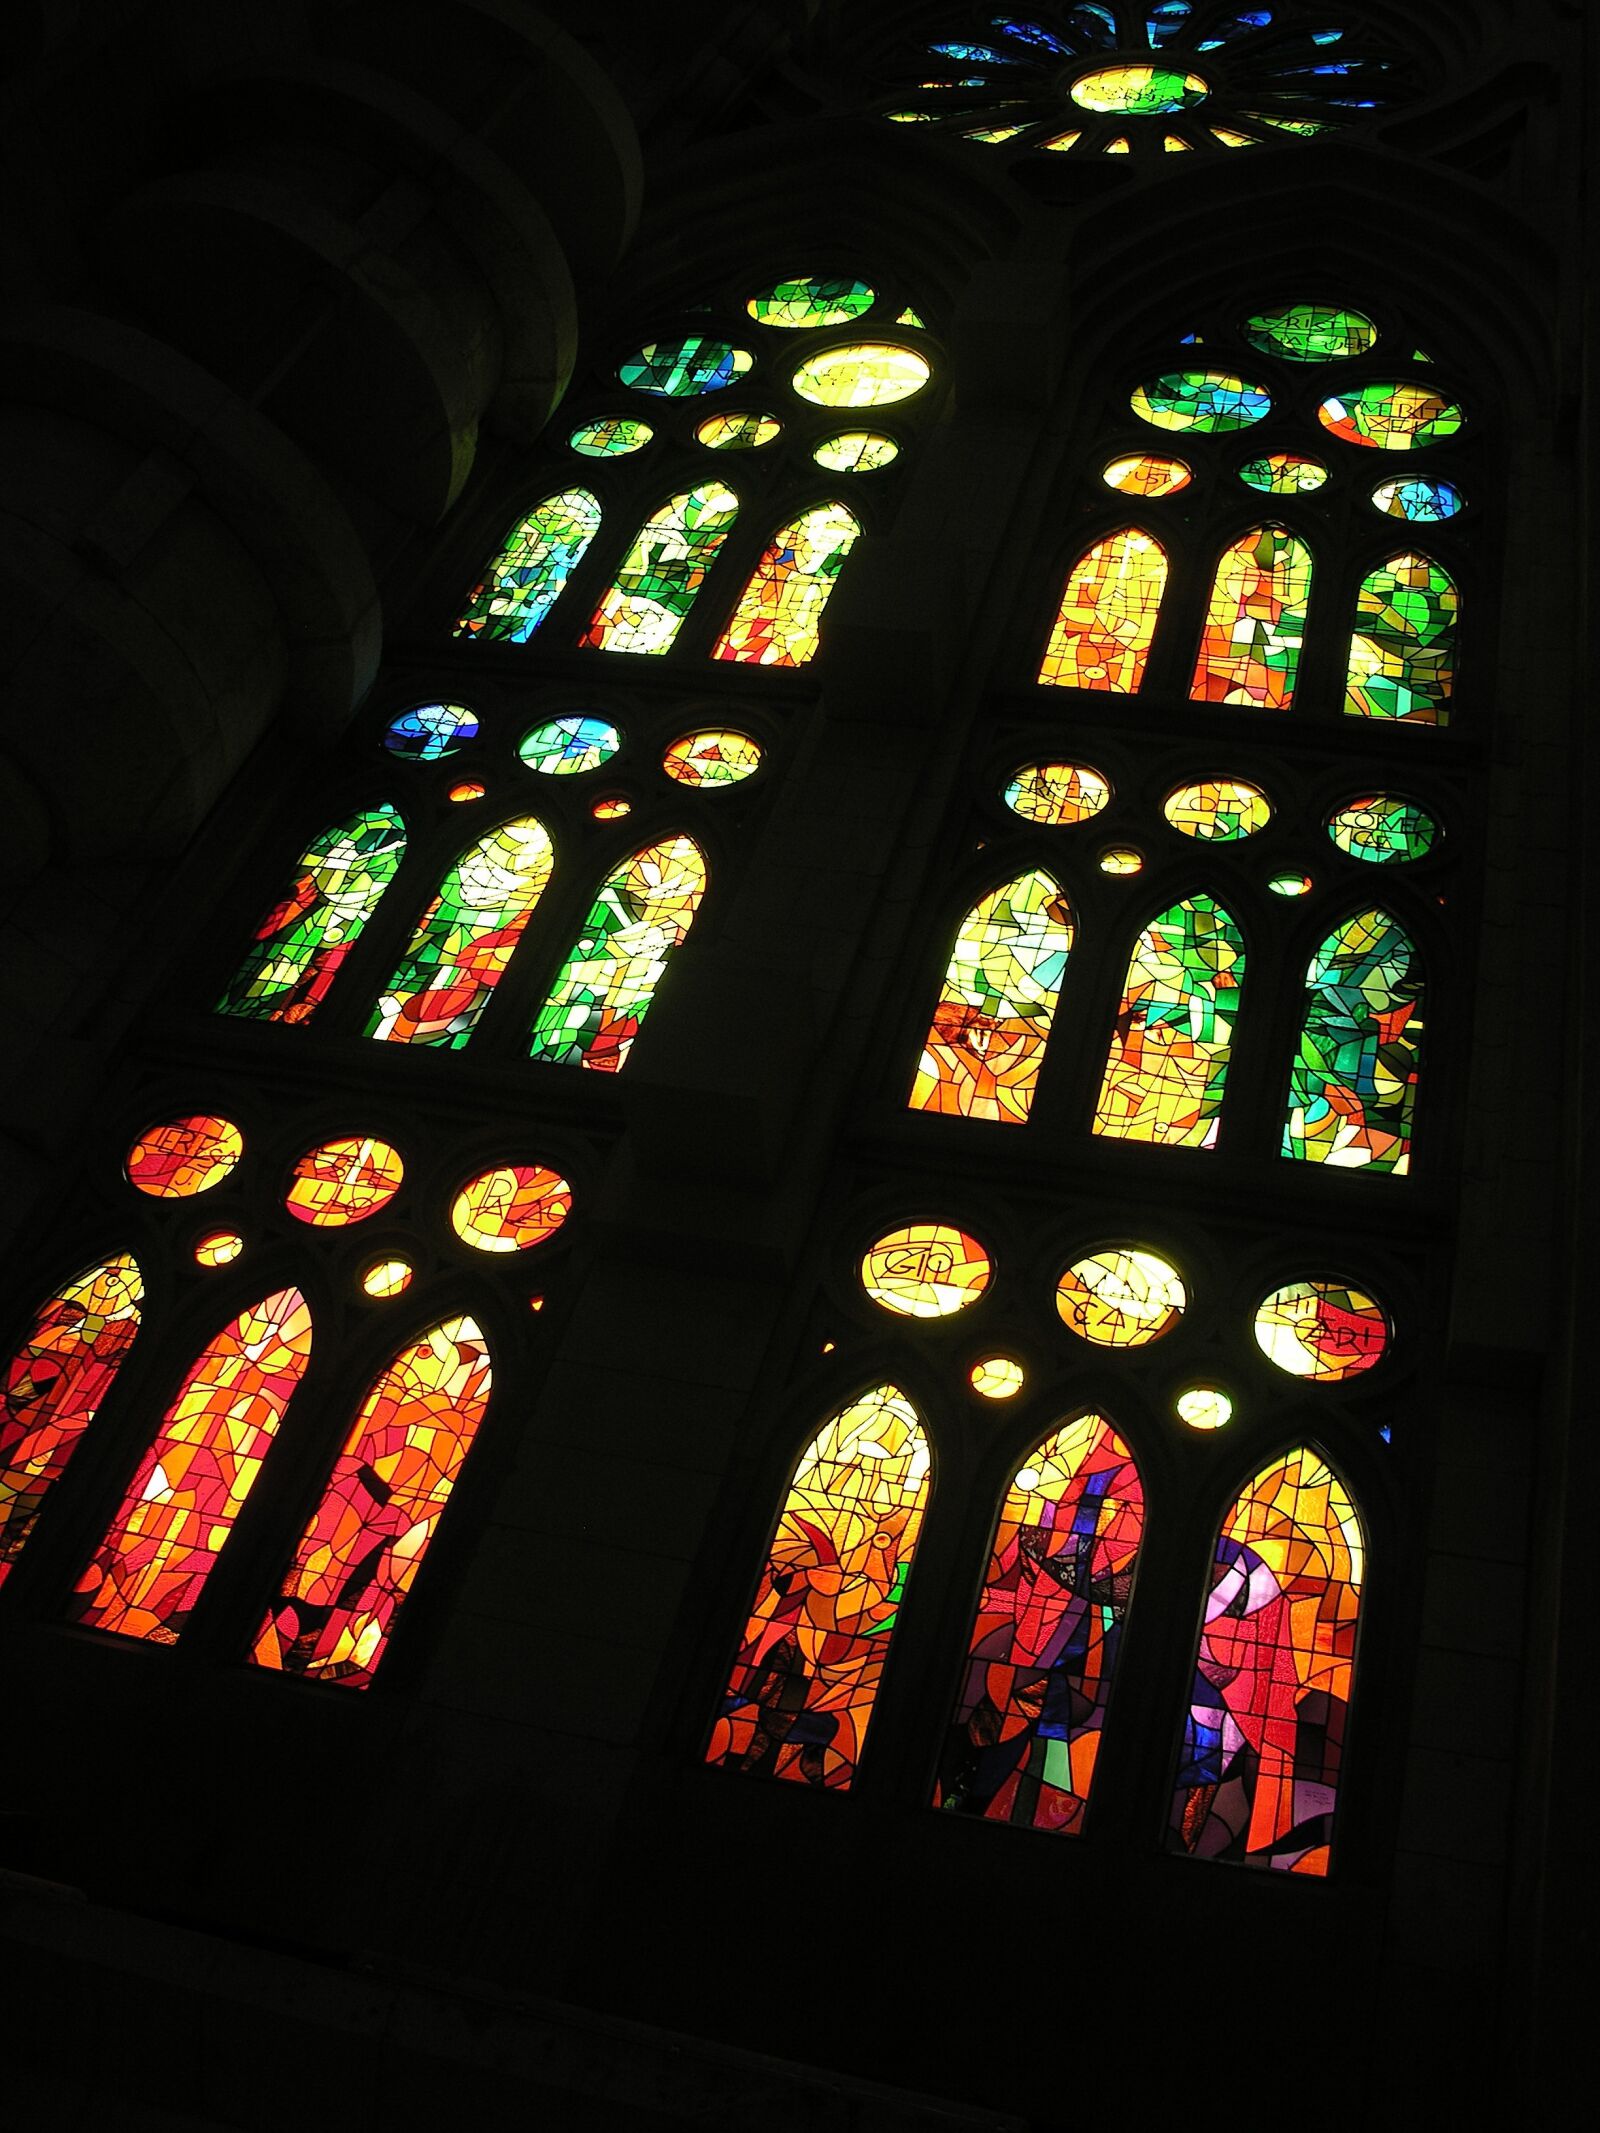 Nikon E8800 sample photo. Stained glass, religion, glass photography